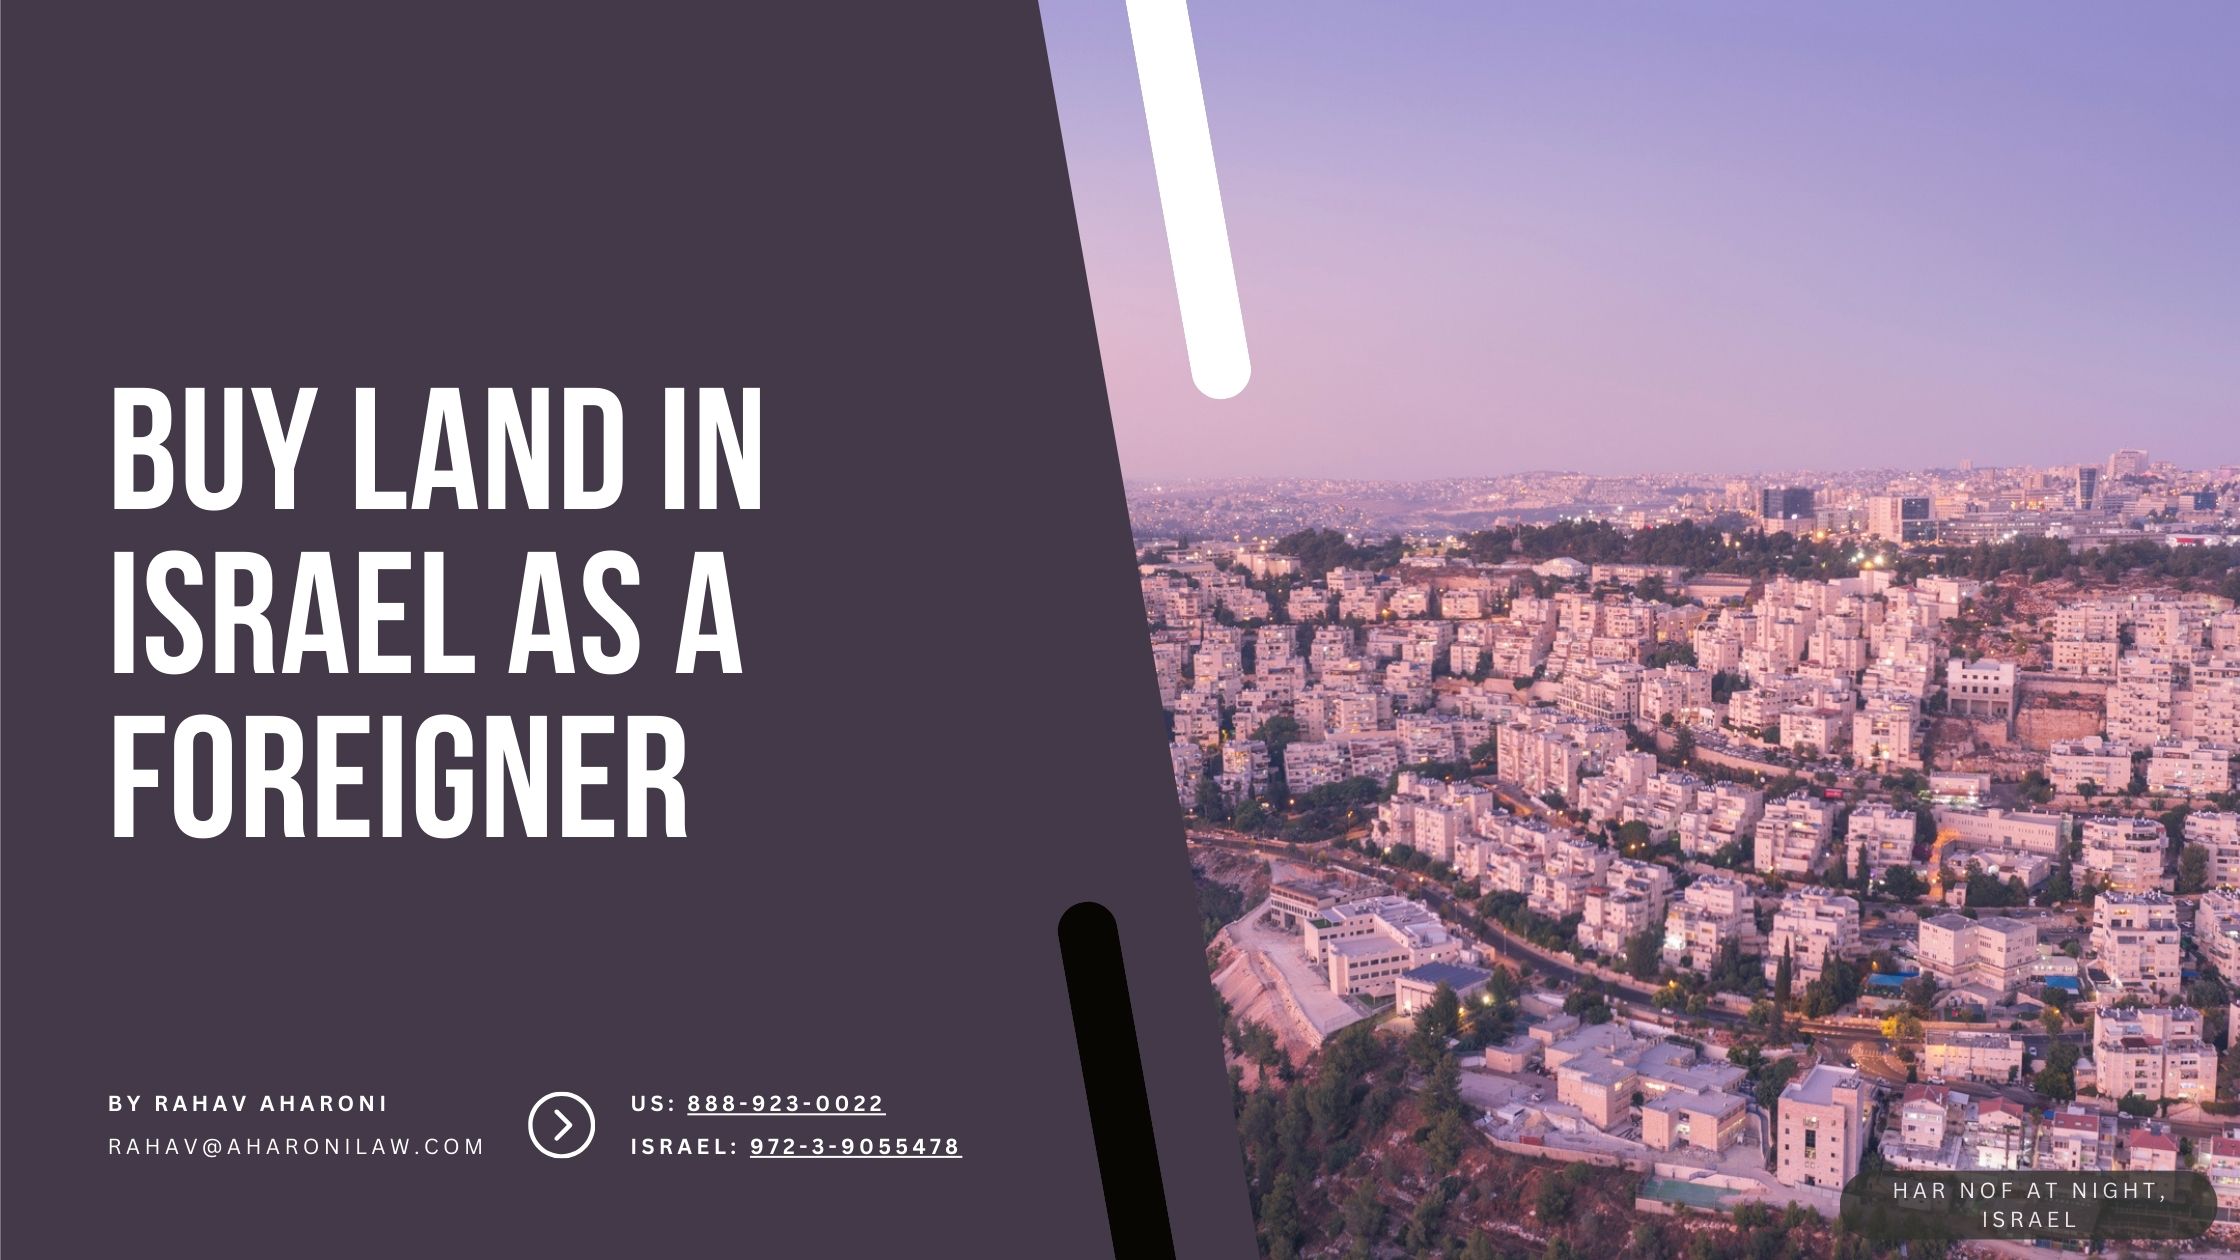 How to Easily Buy Land in Israel as a Foreigner?